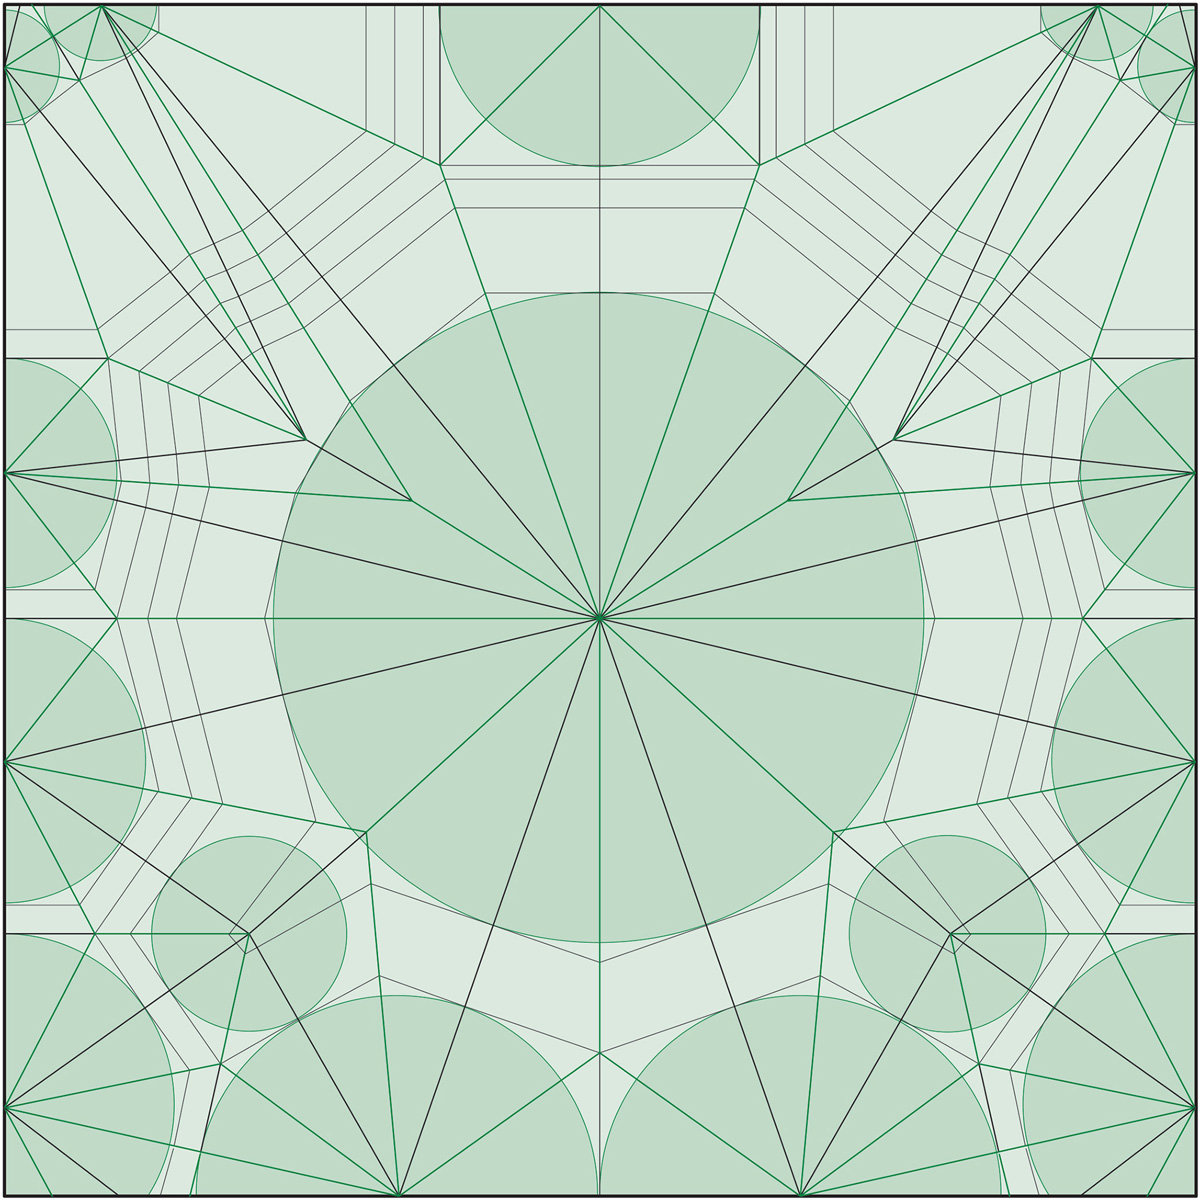 An image of Robert Lang’s crease pattern for creating an origami scorpion.